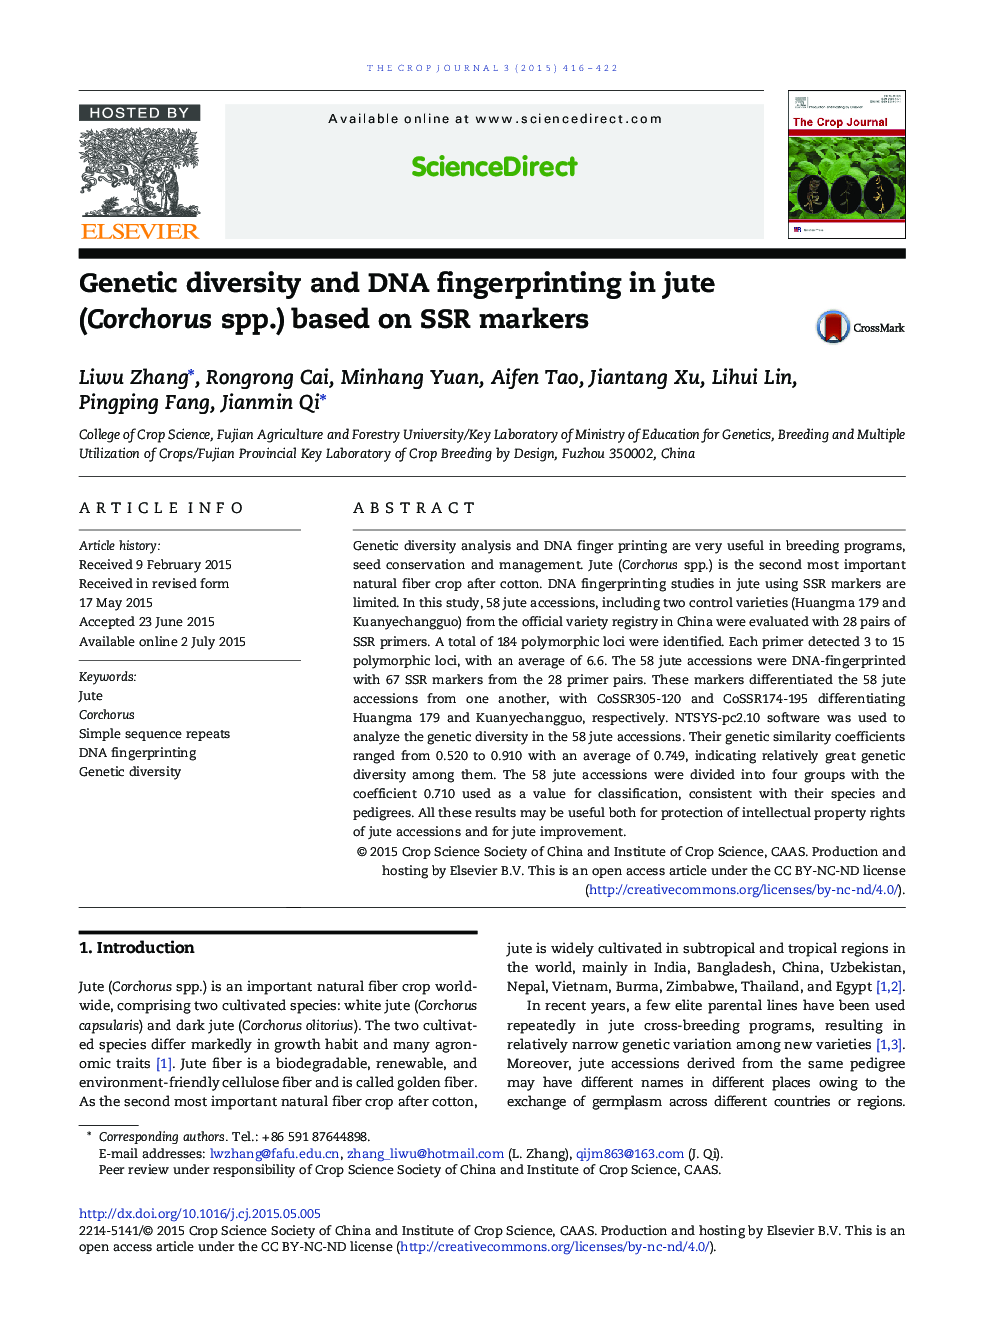 Genetic diversity and DNA fingerprinting in jute (Corchorus spp.) based on SSR markers 